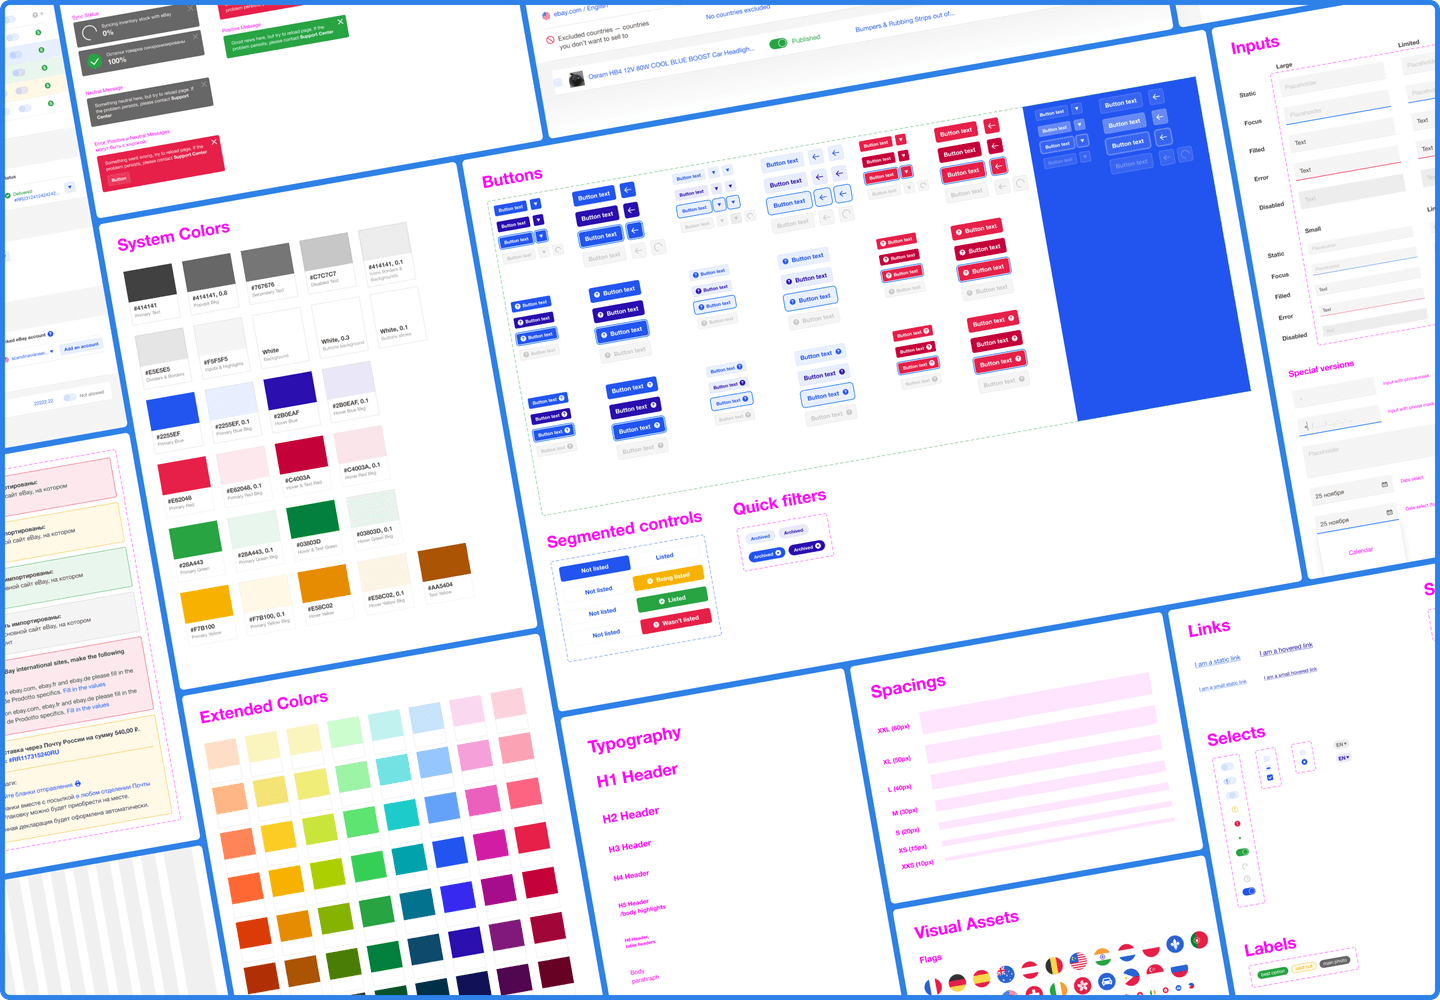 A view showcasing different elements of the design system we developed for eBaymag with items specifying buttons, typography, colors, and so on.